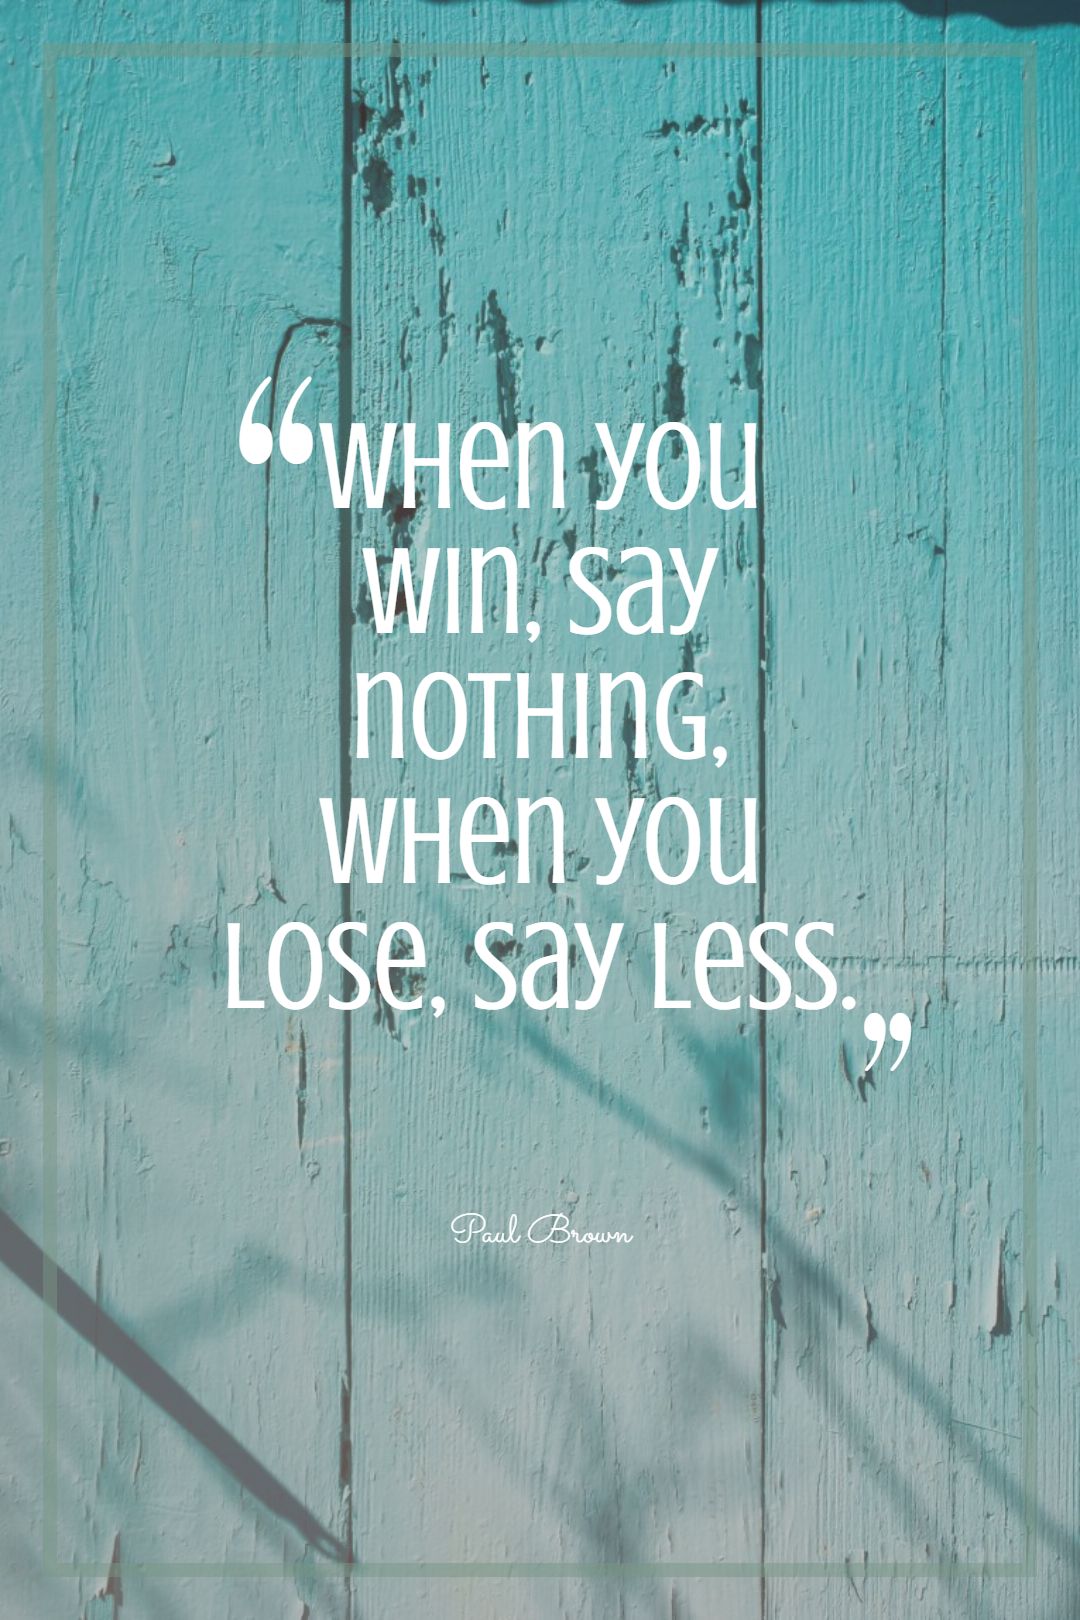 When you win say nothing when you lose say less.